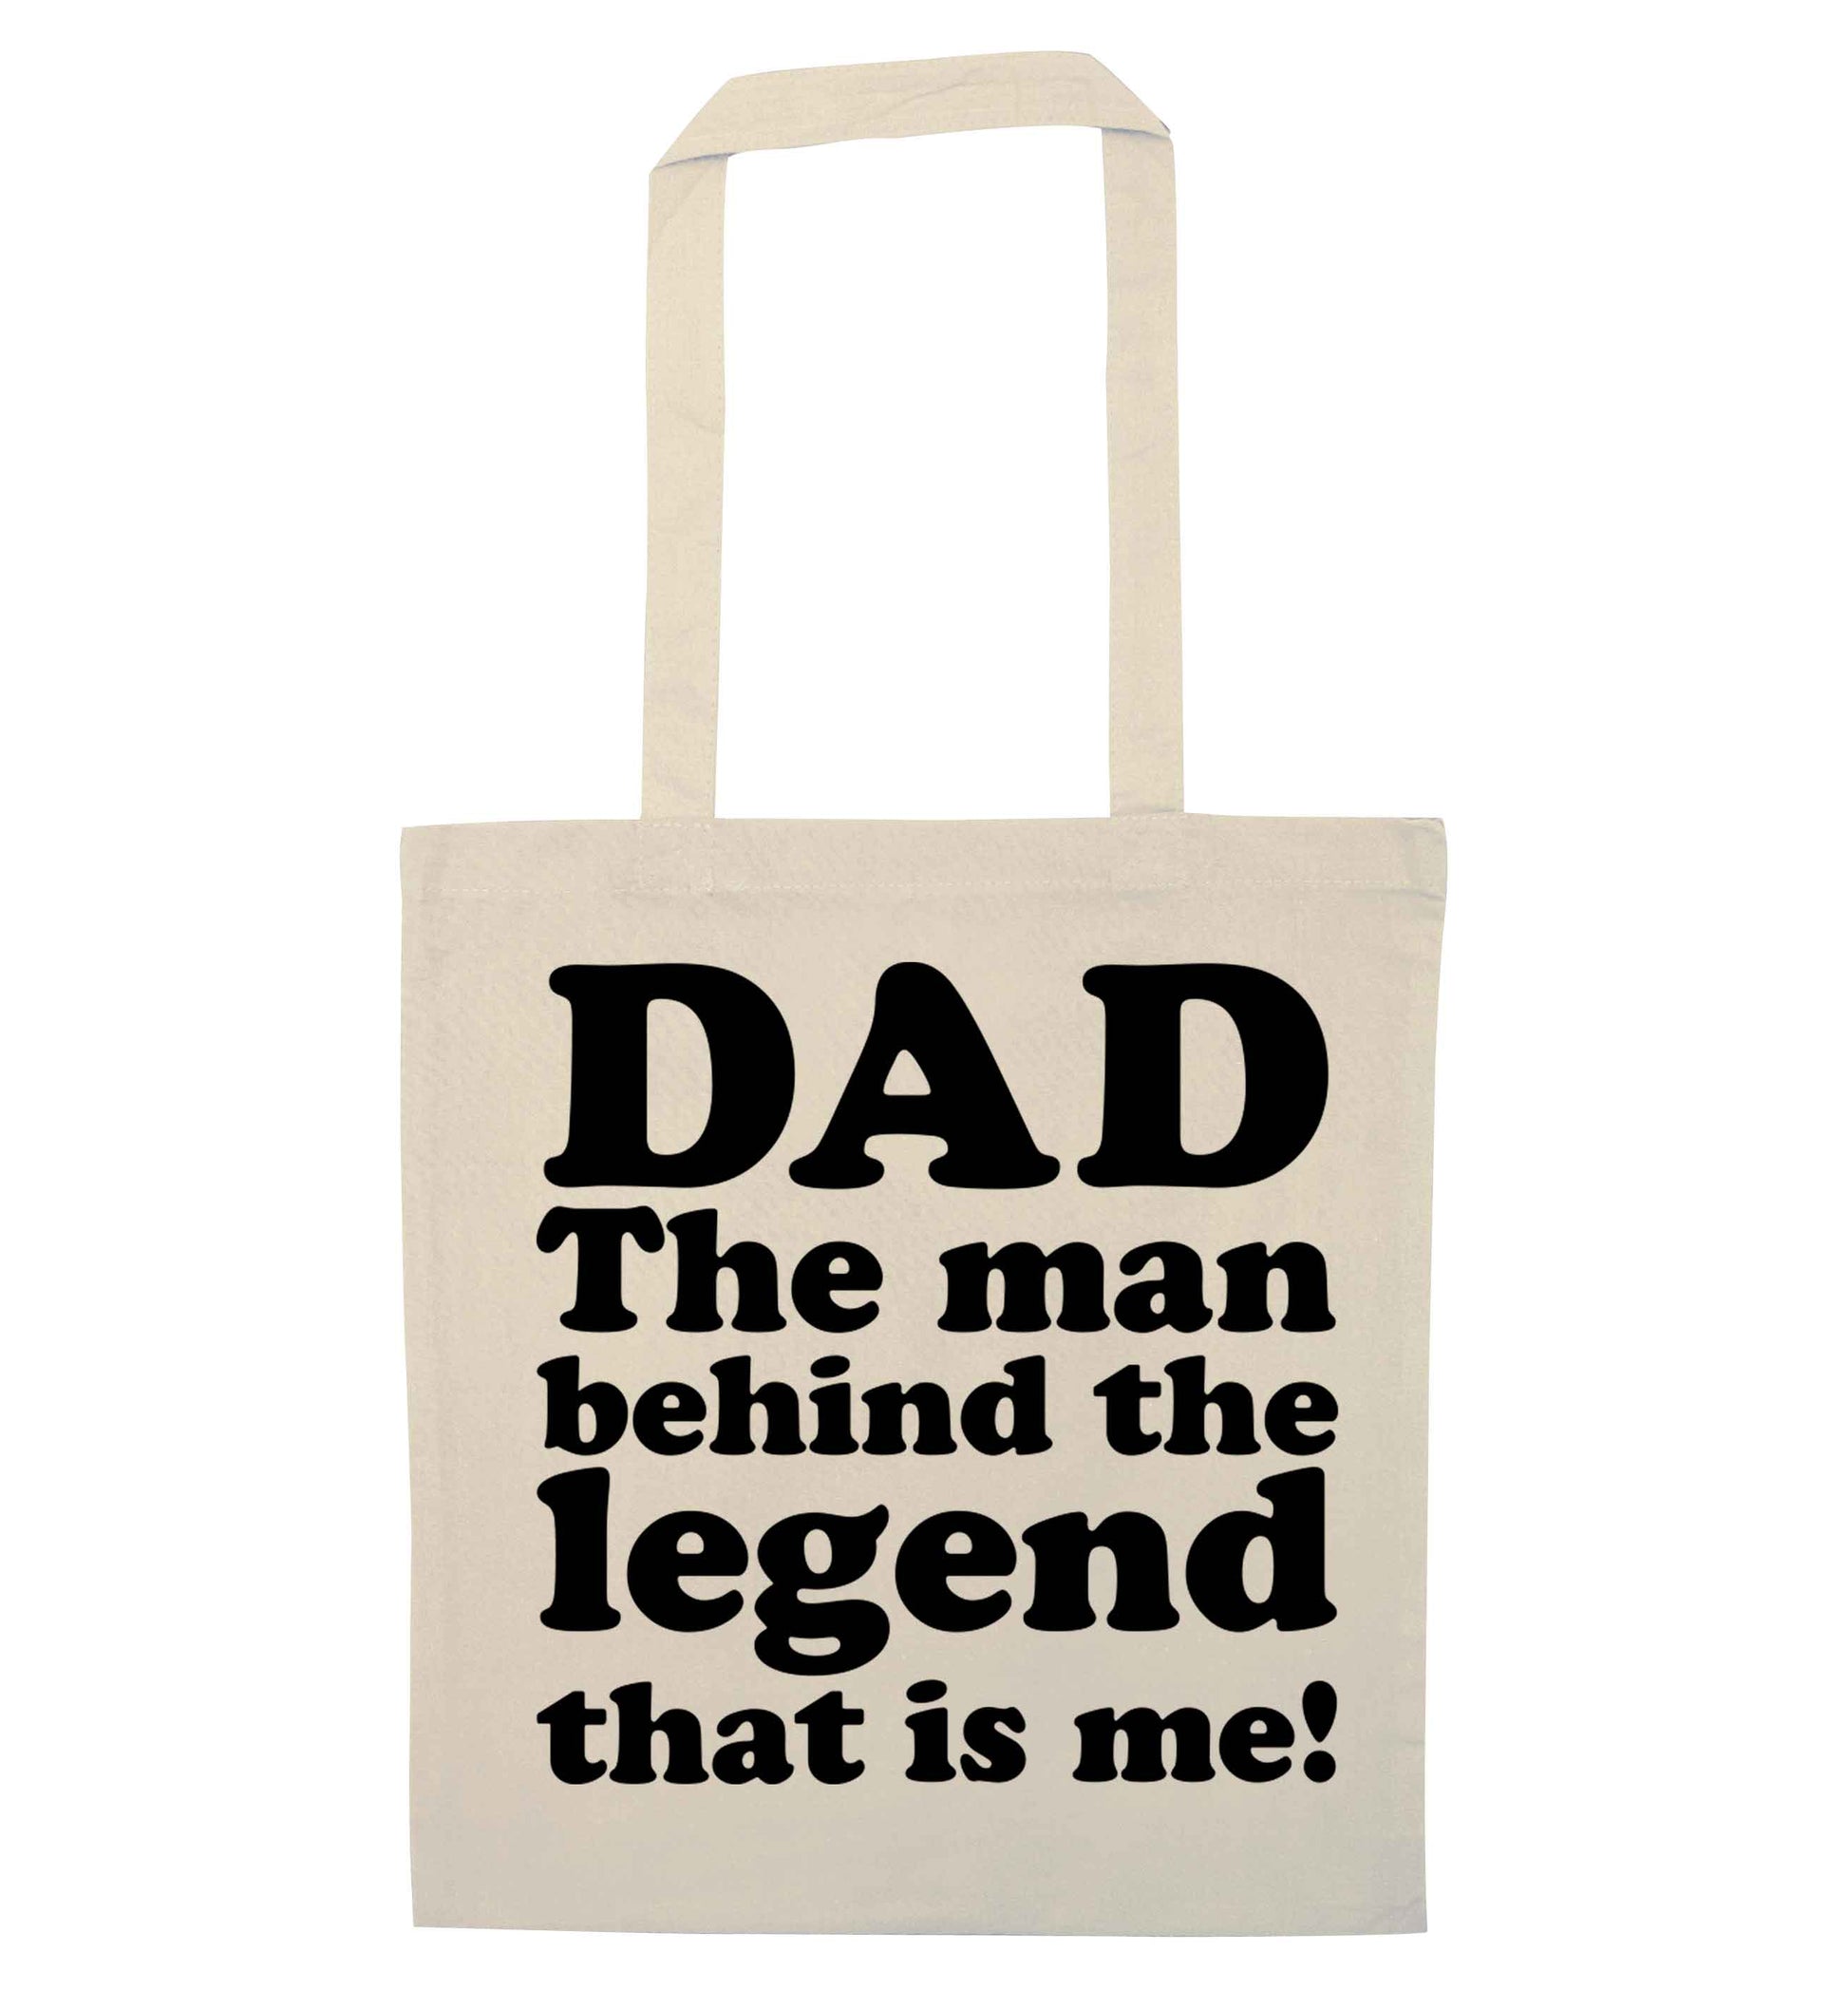 Dad the man behind the legend that is me natural tote bag